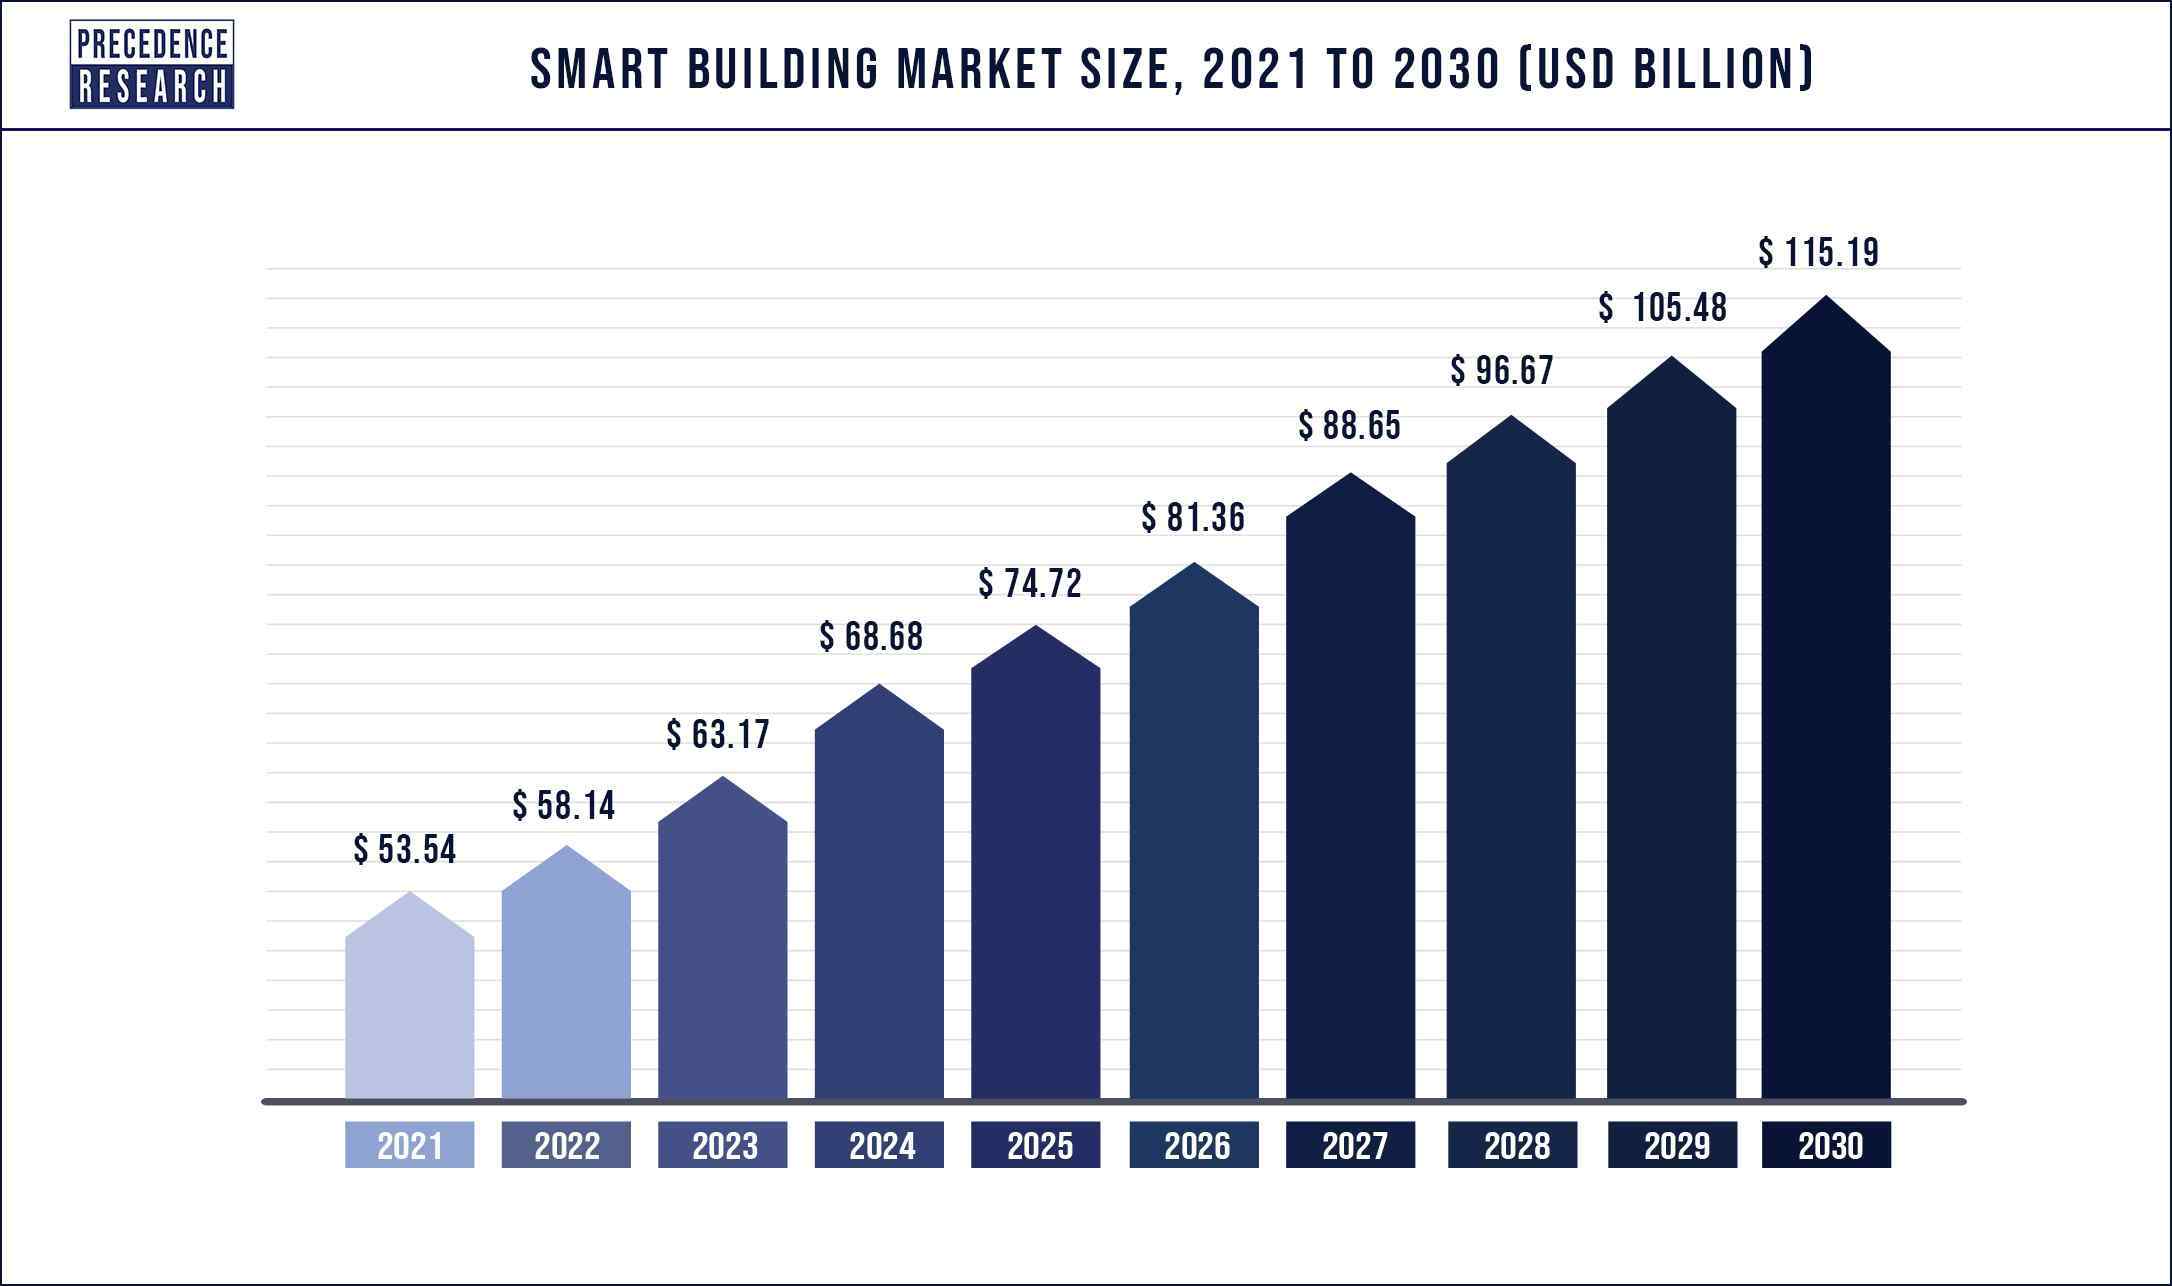 Smart Building Market Size 2021 to 2030